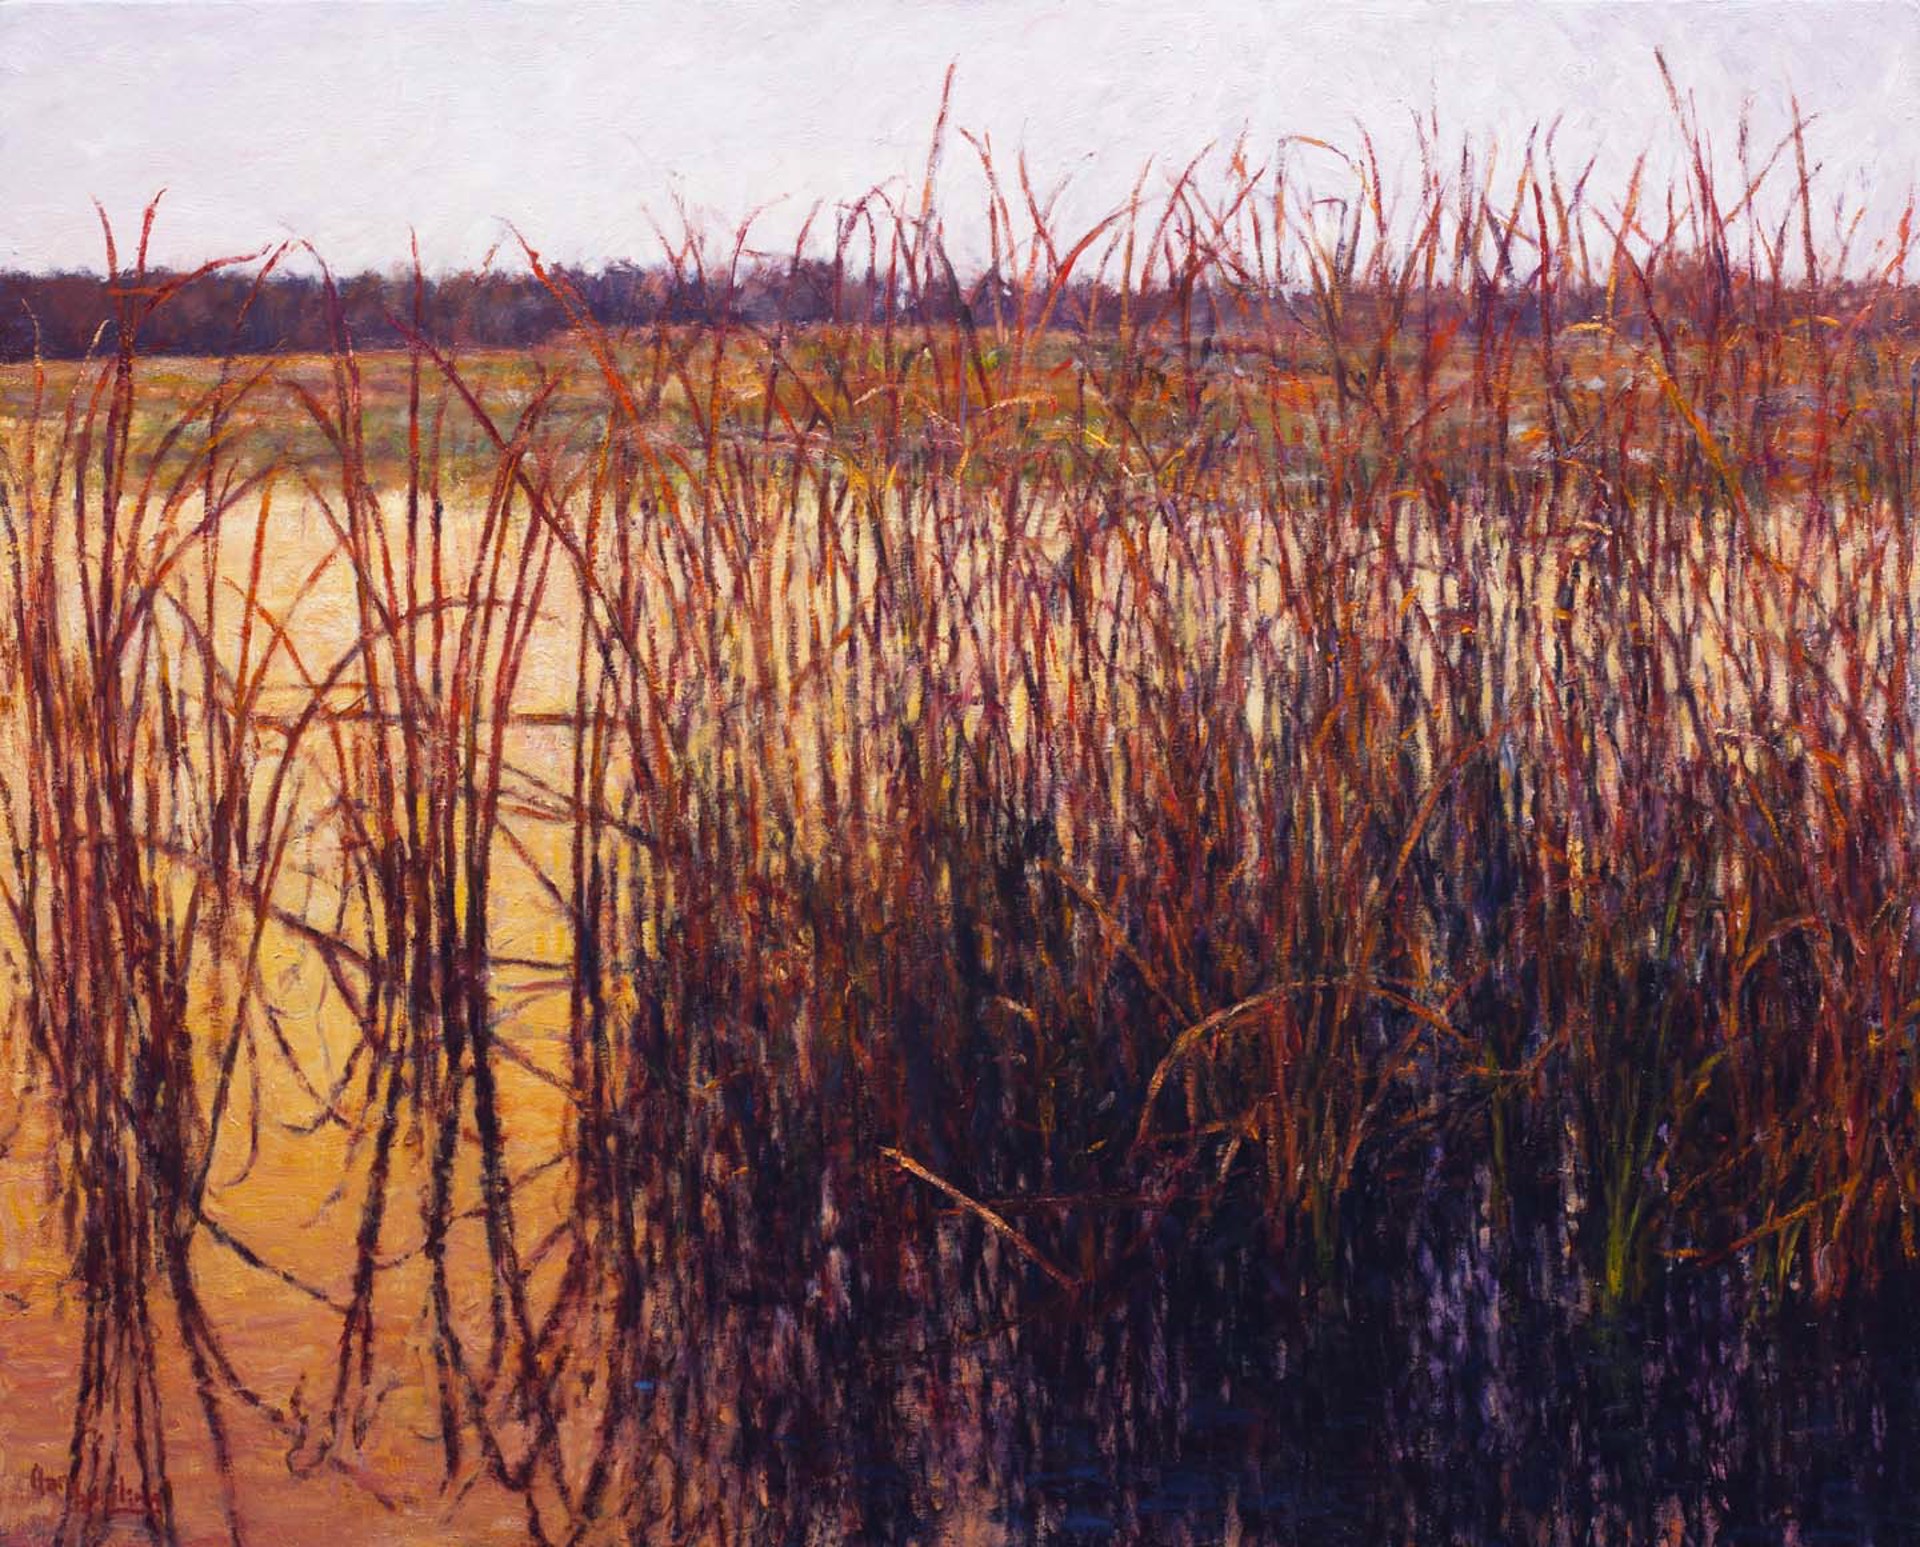 Reeds on a Yellow Marsh in August by Gary Bowling